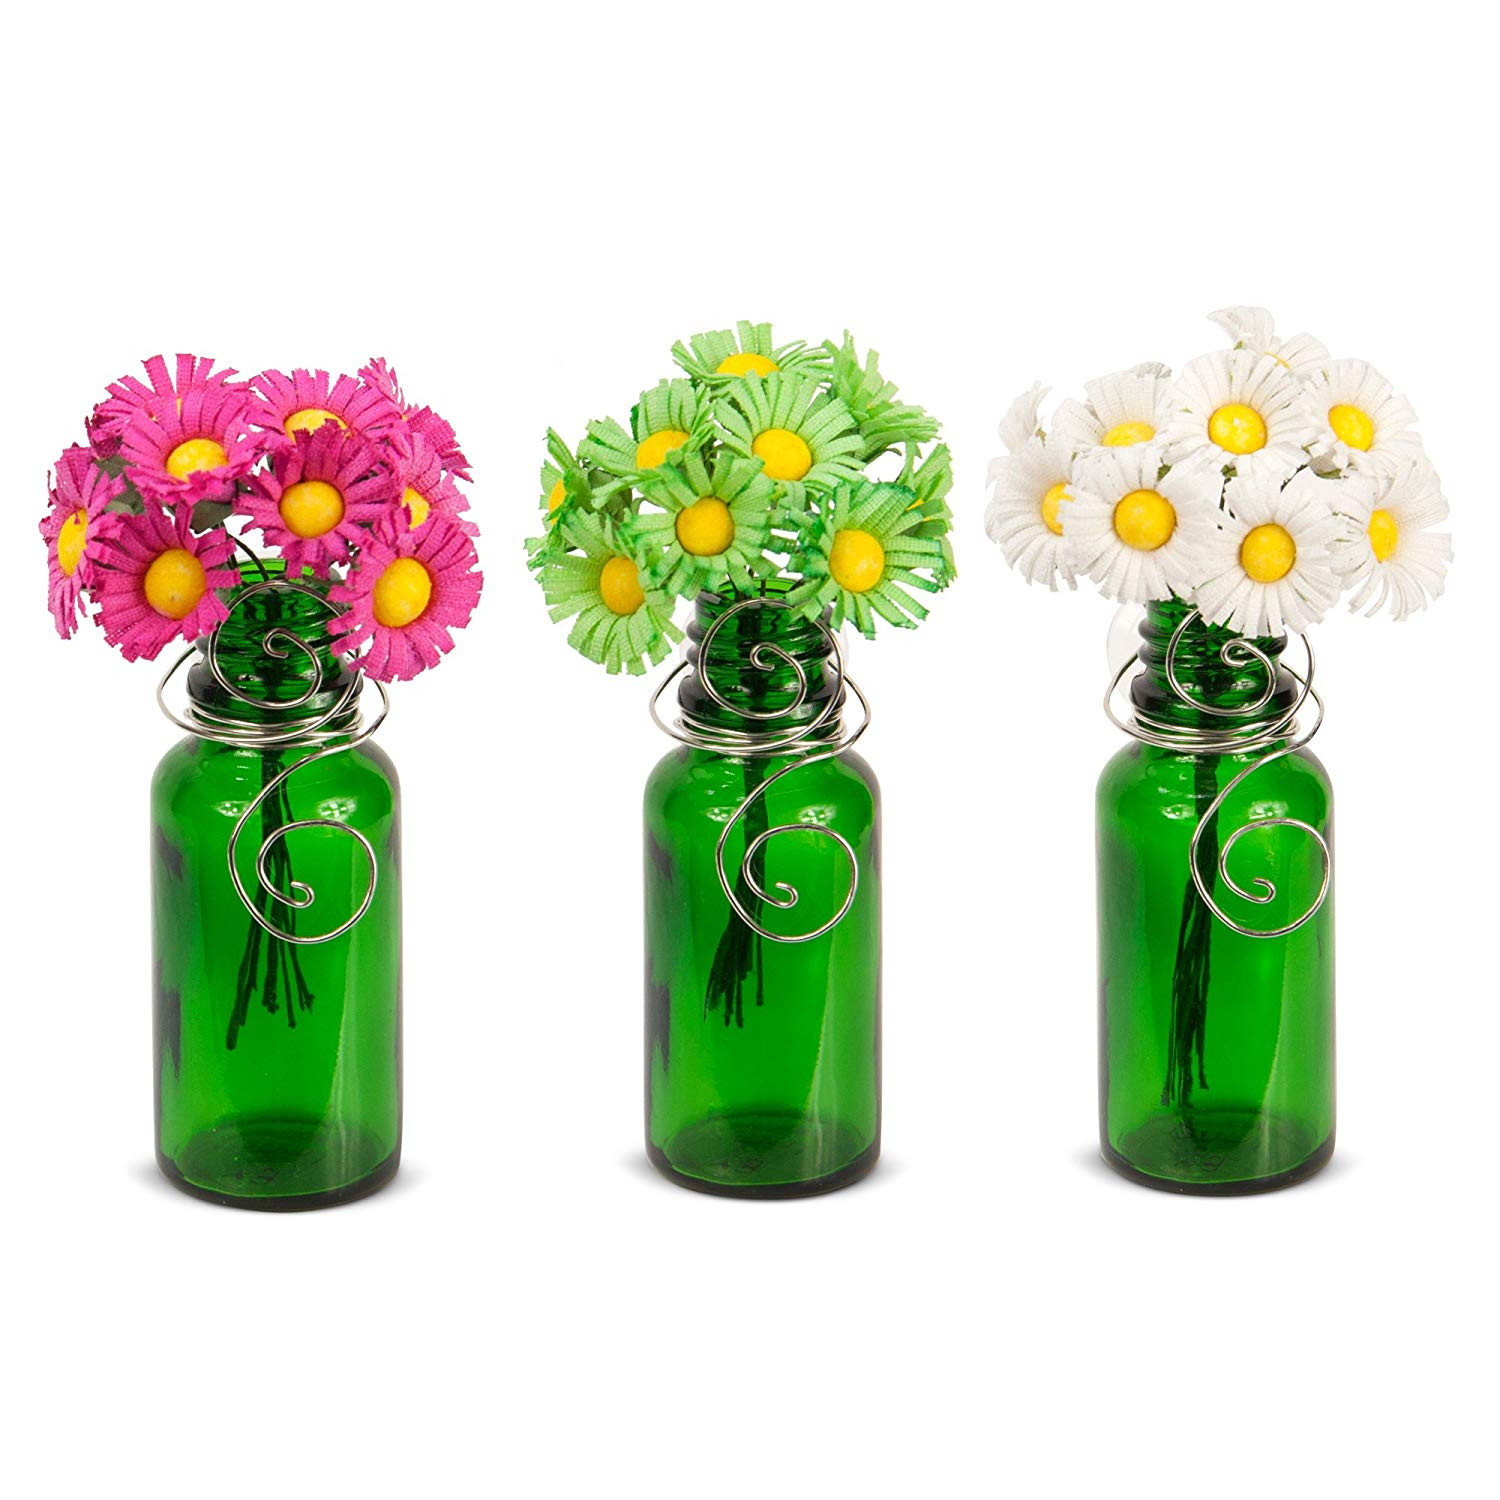 18 Popular Unique Shaped Glass Vases 2024 free download unique shaped glass vases of amazon com vazzini mini vase bouquet suction cup bud bottle within amazon com vazzini mini vase bouquet suction cup bud bottle holder with flowers decorative for